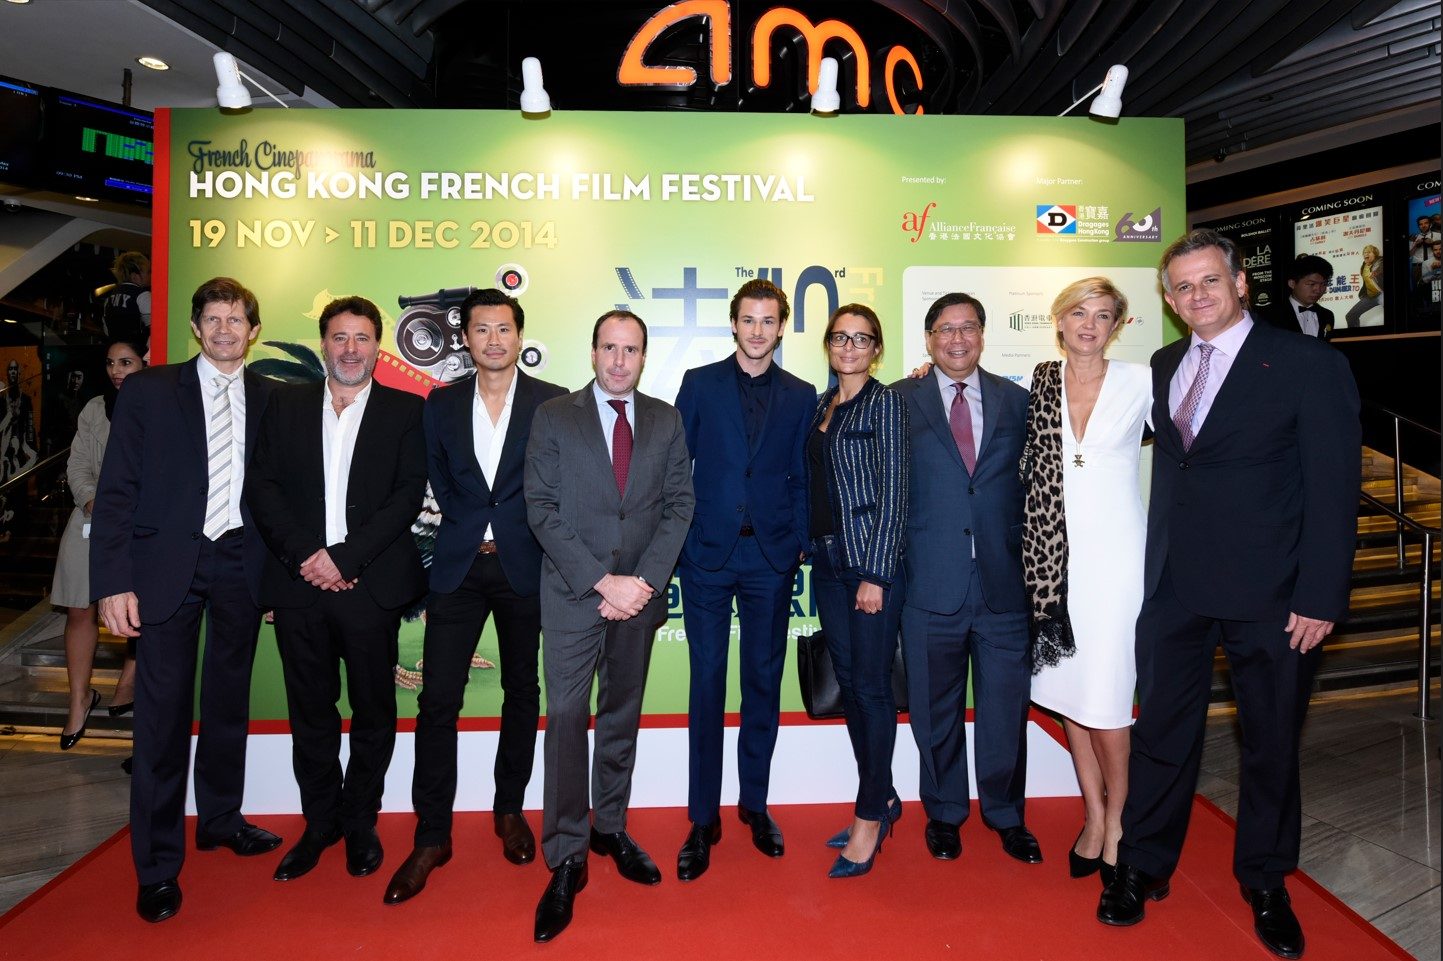 French actors Frédéric Chau and Gaspard Ulliel alongside french director Philippe de Chauveron at the opening of the French Films Festival 2014.